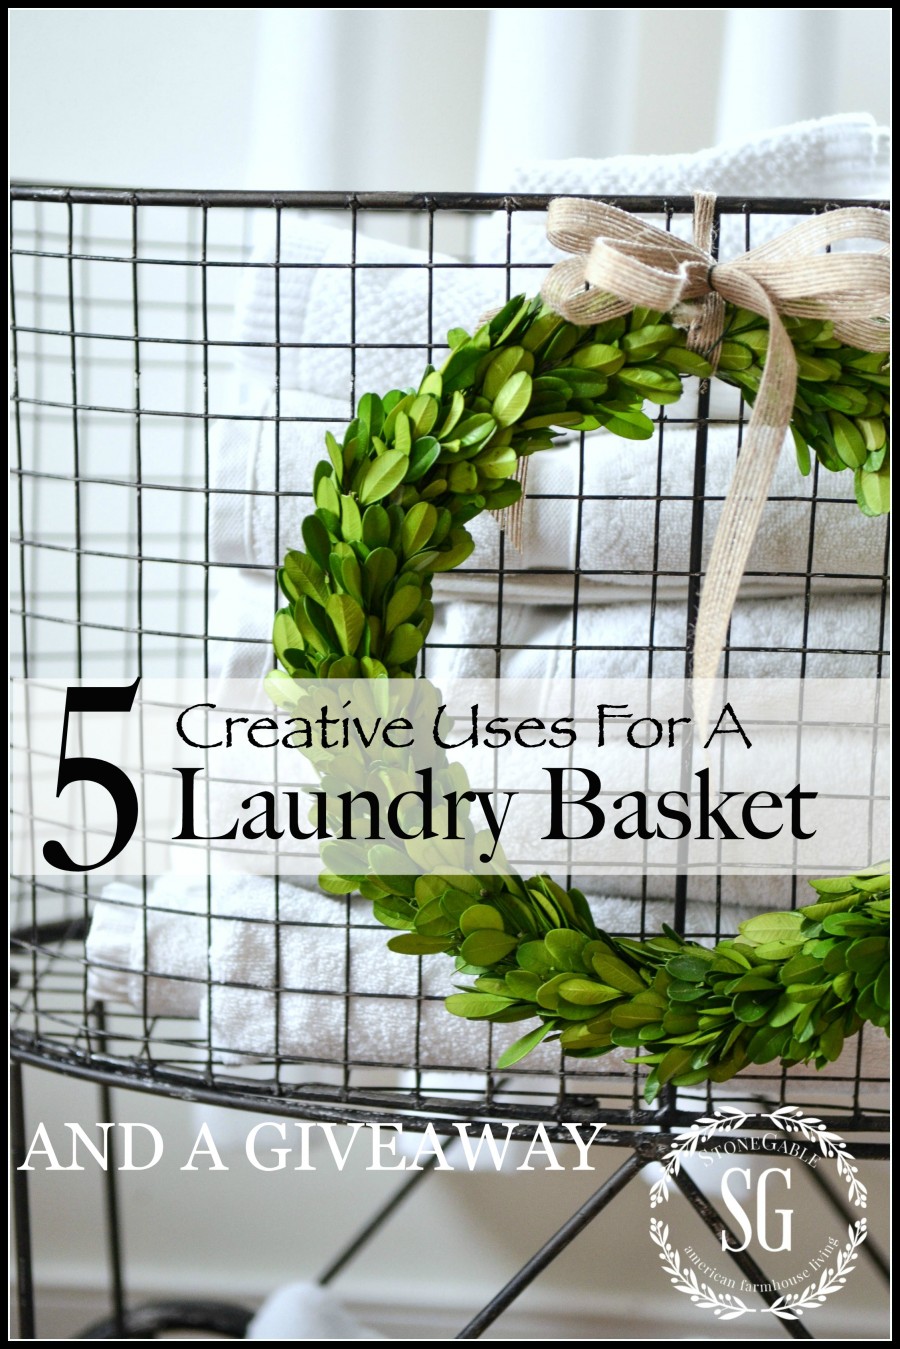 5 CREATIVE USES FOR A LAUNDRY BASKET ... practical and pretty! Male sure to enter the Laundry Basket Giveaway